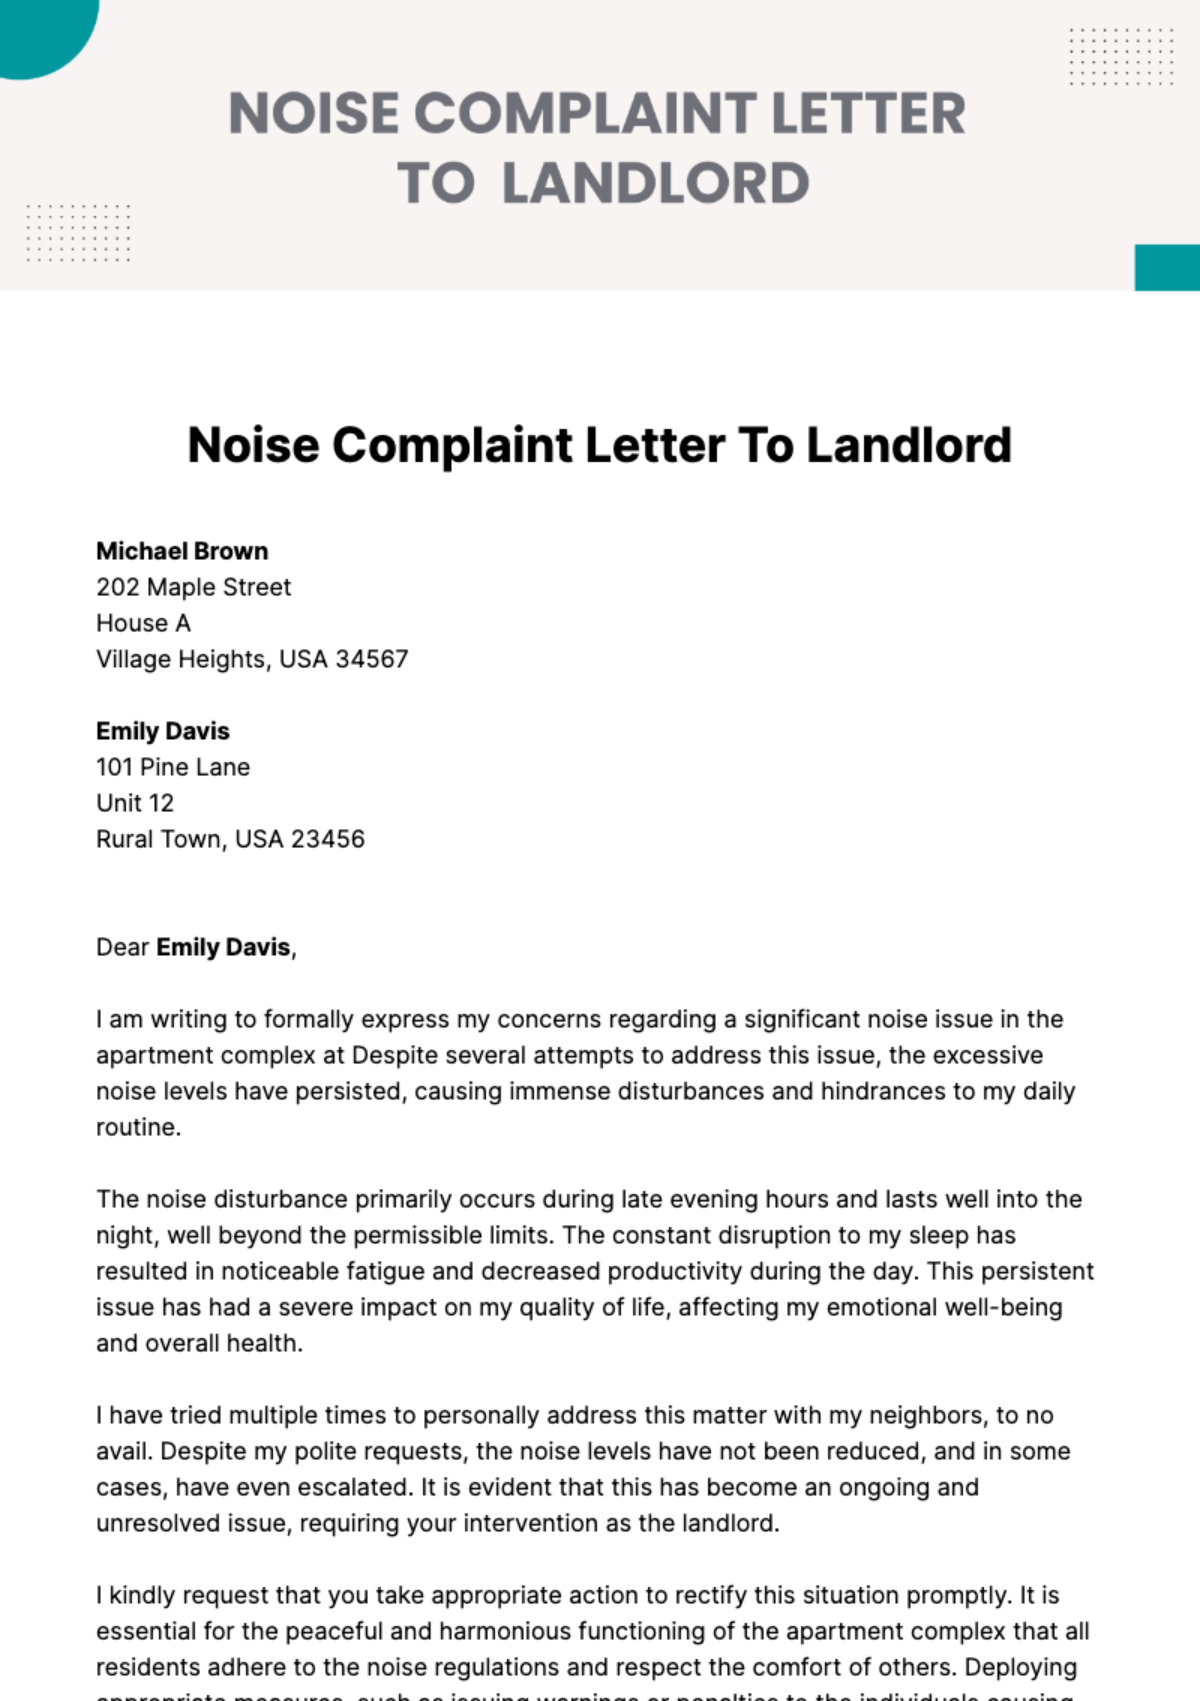 Noise Complaint Letter To Landlord Template